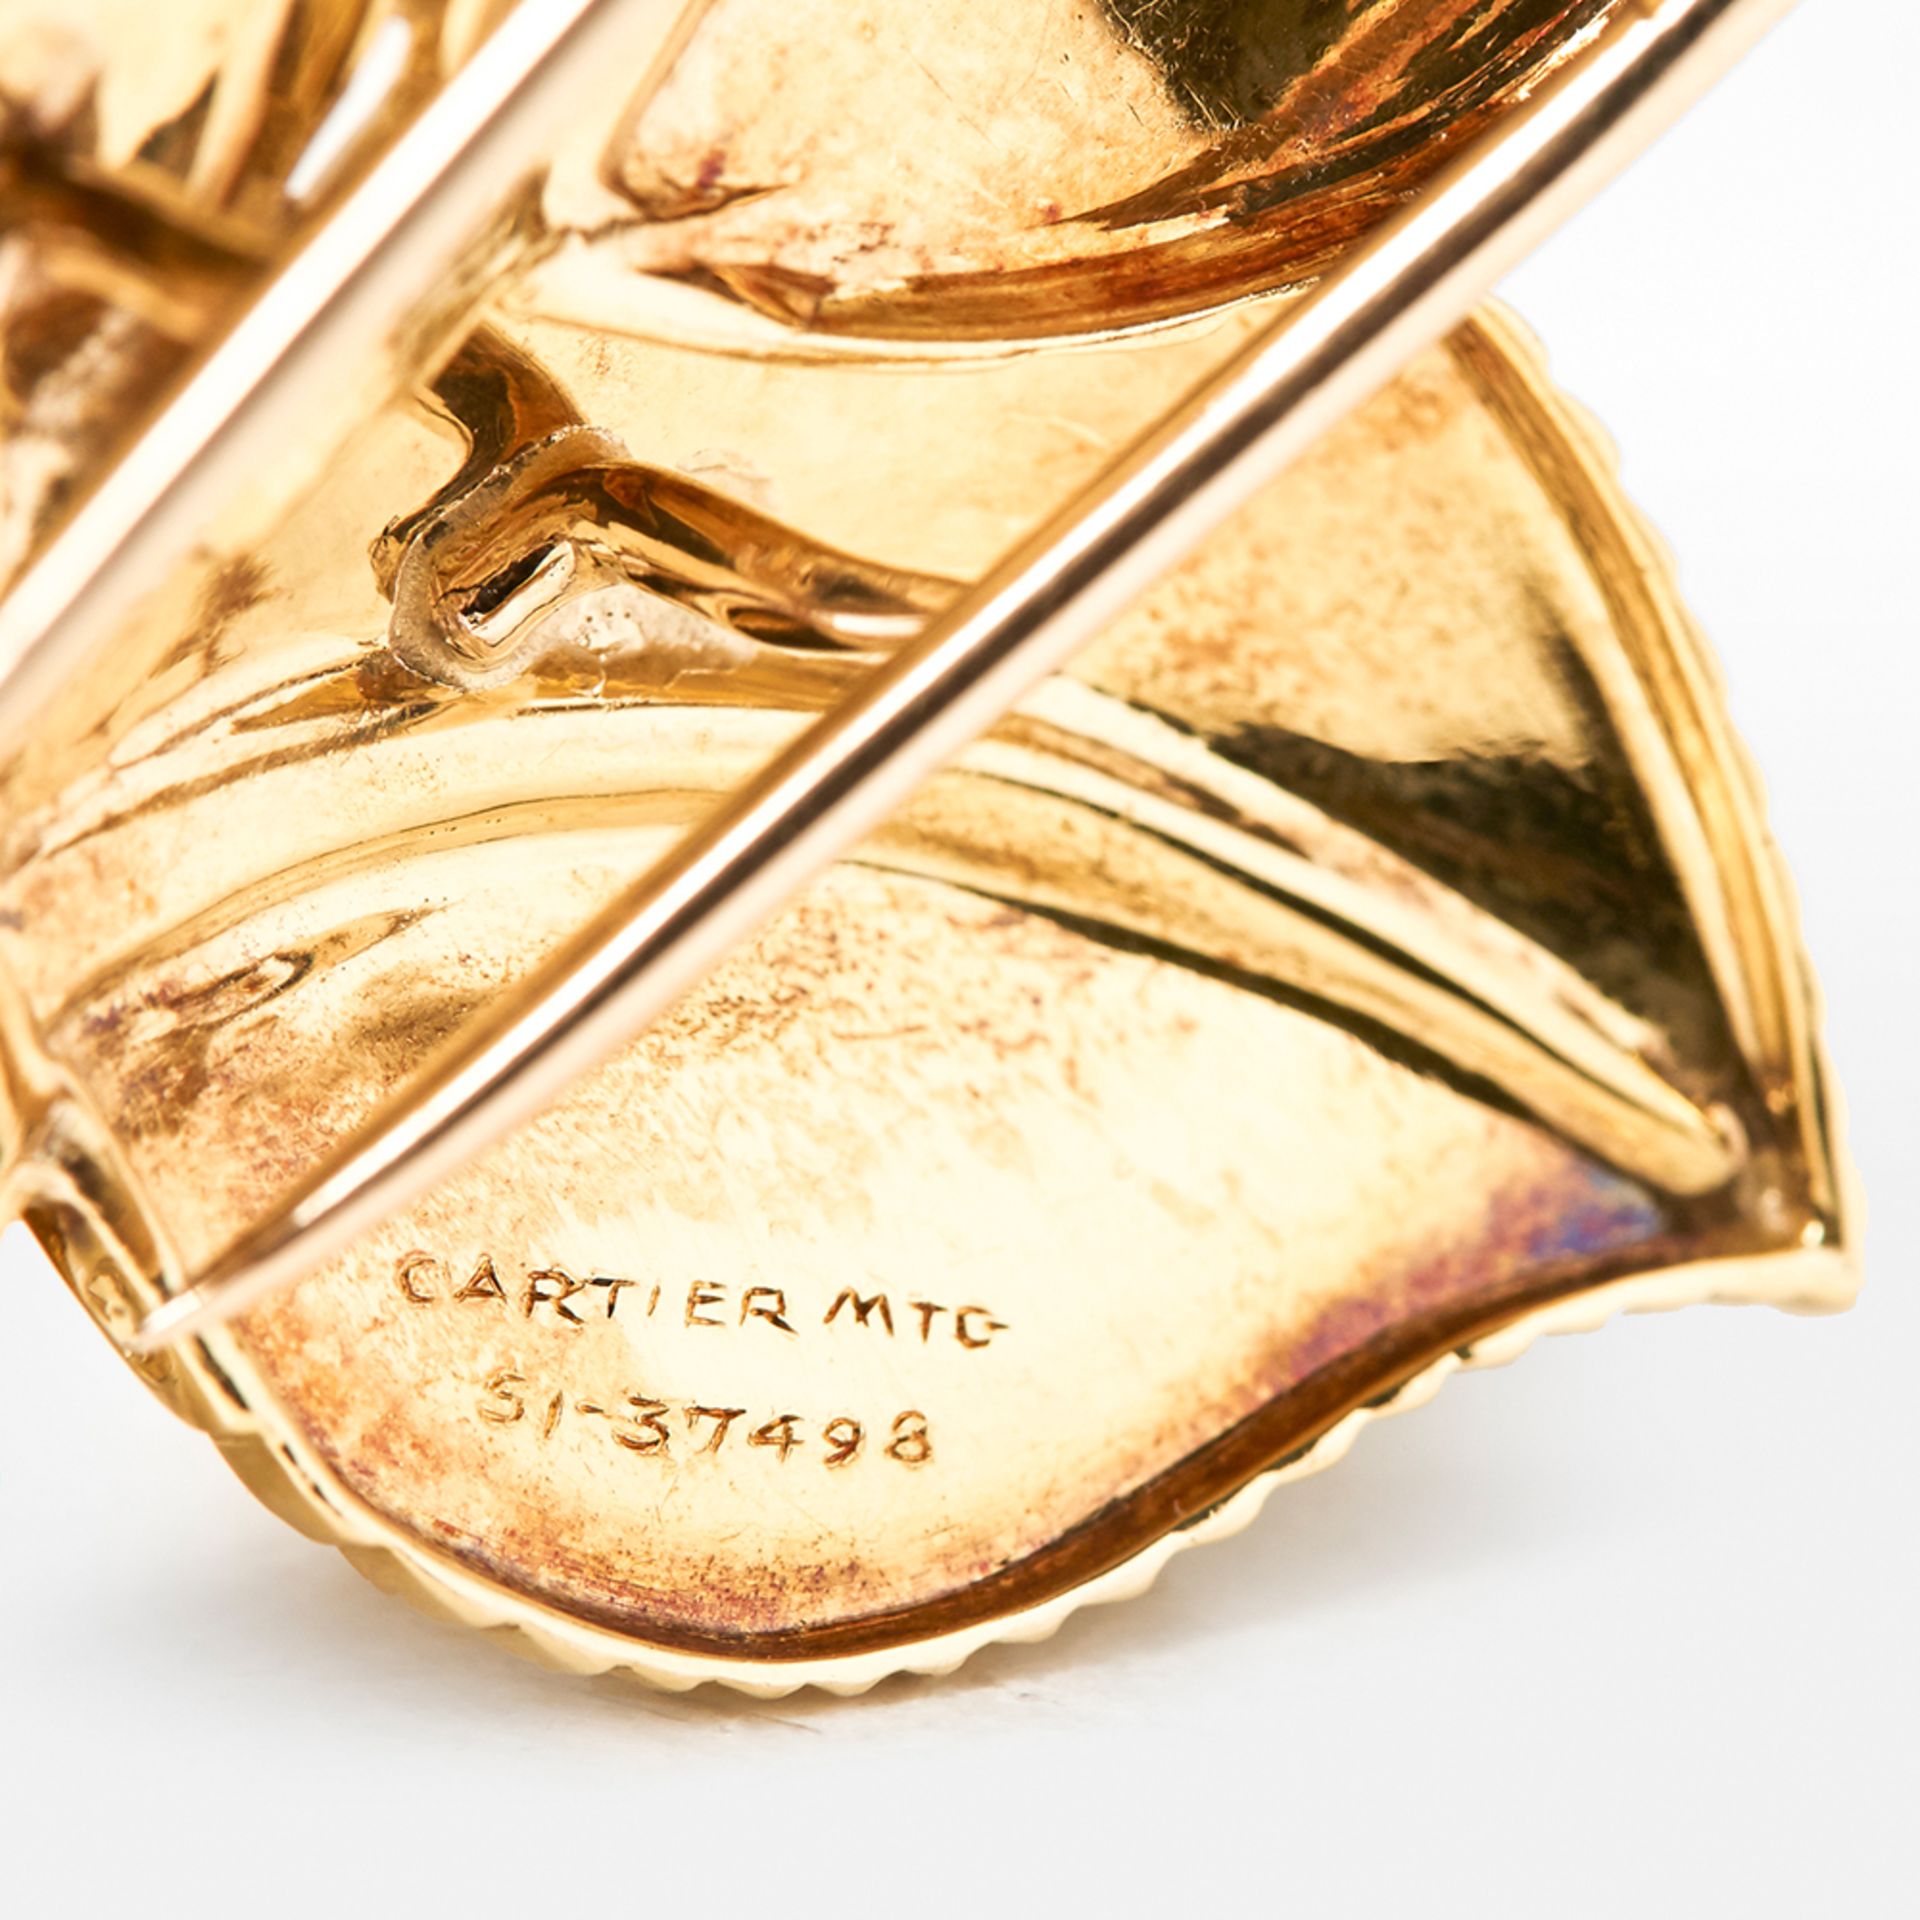 Cartier 18k Yellow Gold Diamond Vintage Leaf Brooch - Image 8 of 8